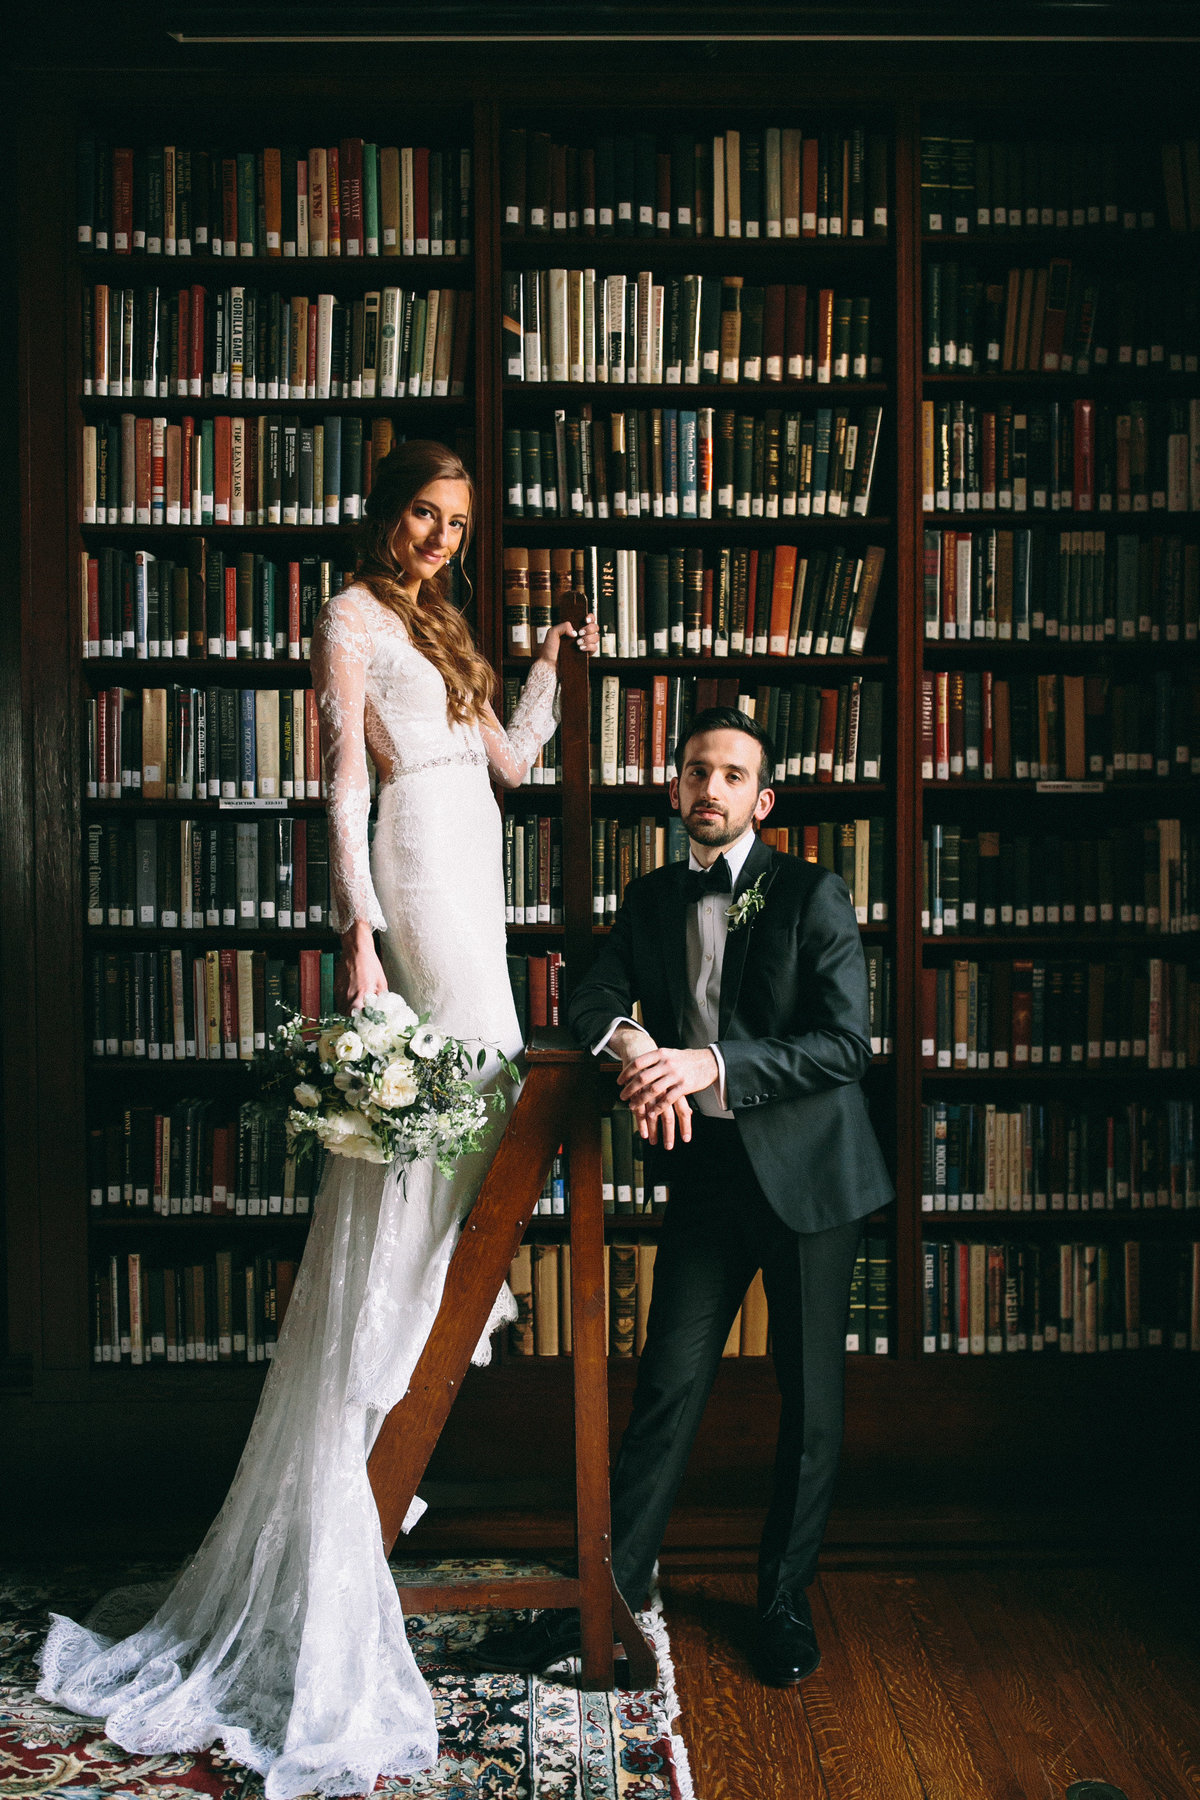 Dramatic portrait of this bride and groom photographed in the library at Philadelphia's Union League.